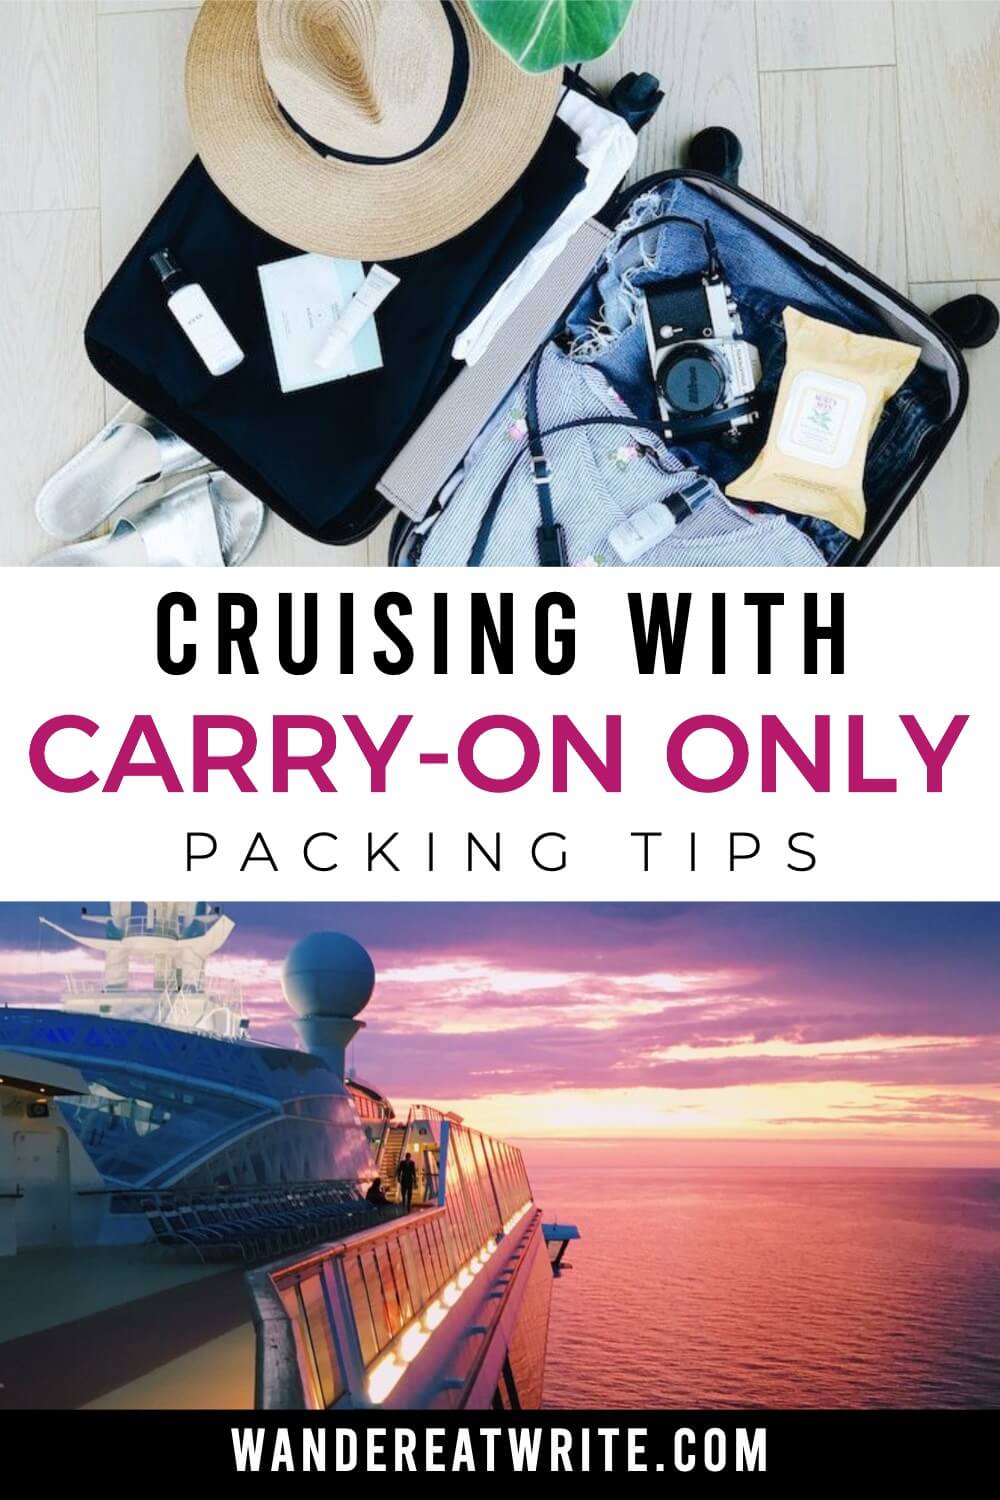 Pin text: cruising with carry-on only-- packing tips. Top photo: flatlay suitcase opened. Contents include a sun hat, camera, toiletries, and clothes. Bottom photo: sunset photo from forward top open deck of cruise ship looking toward the aft, surrounded by pink waters illuminated by the sunset